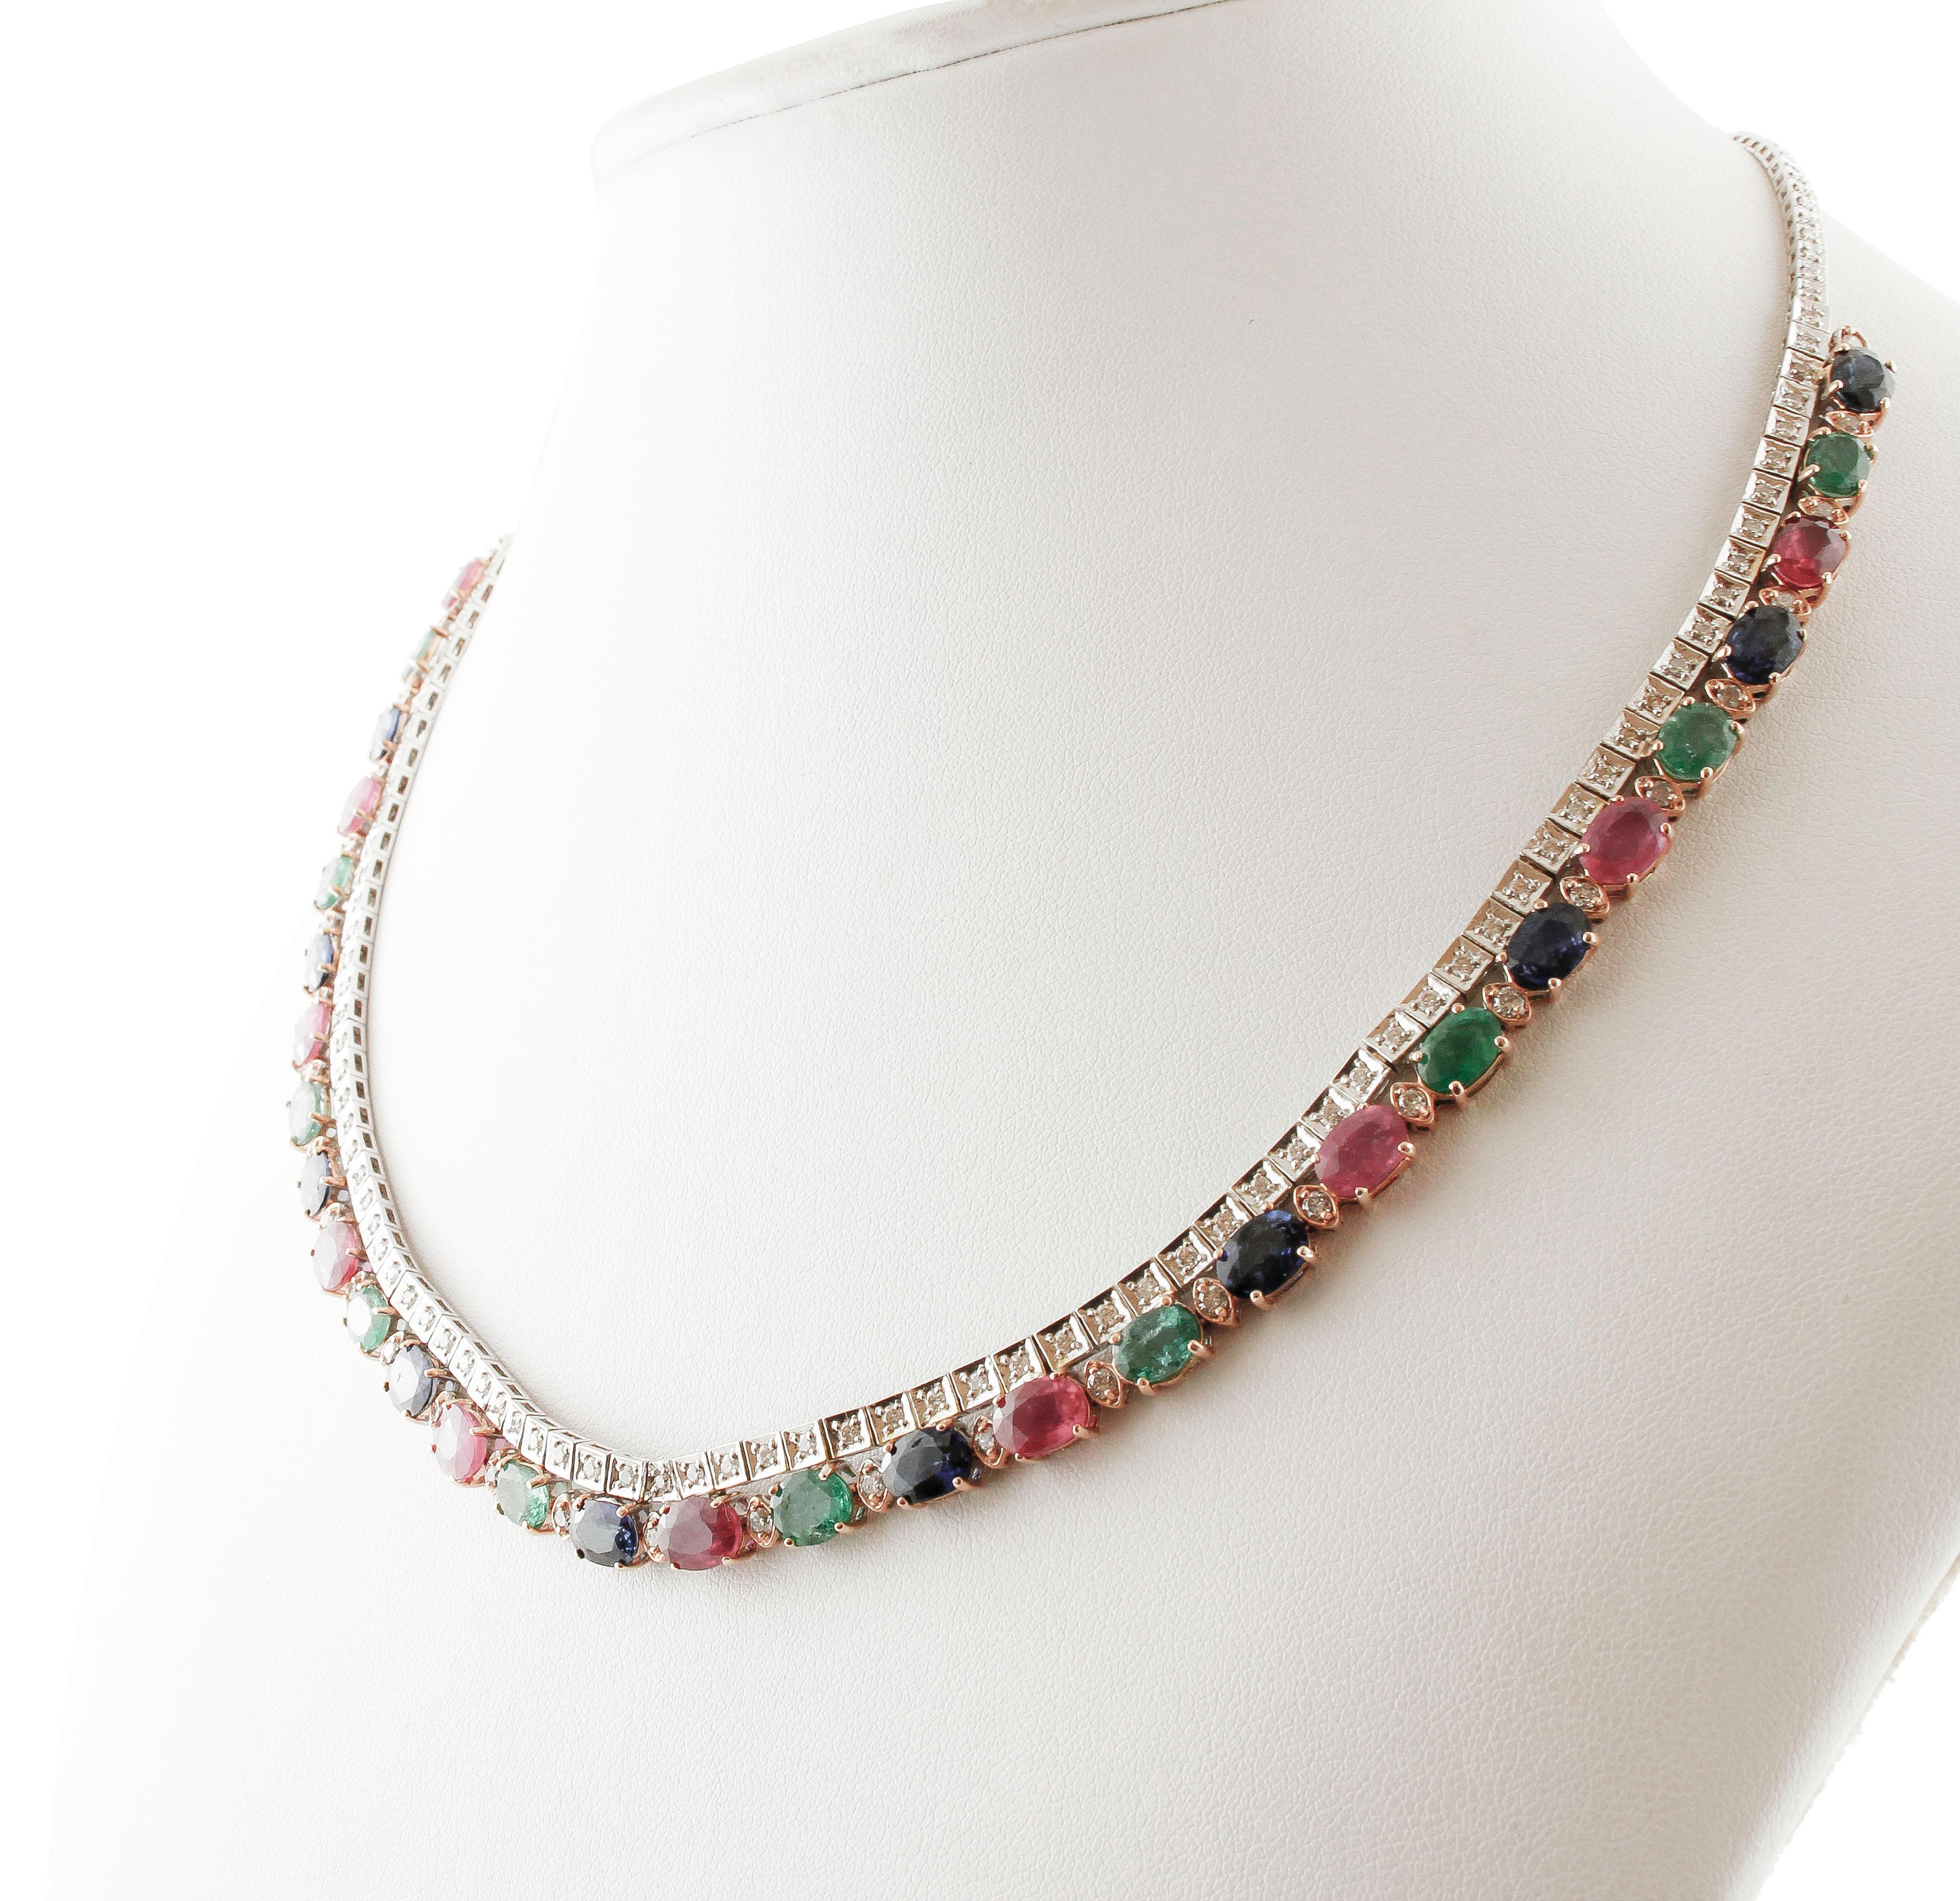 SHIPPING POLICY: 
No additional costs will be added to this order. 
Shipping costs will be totally covered by the seller (customs duties included).

Elegant link necklace composed of 3.74 ct of white diamonds rows adorned with 23.45 ct of rubies,